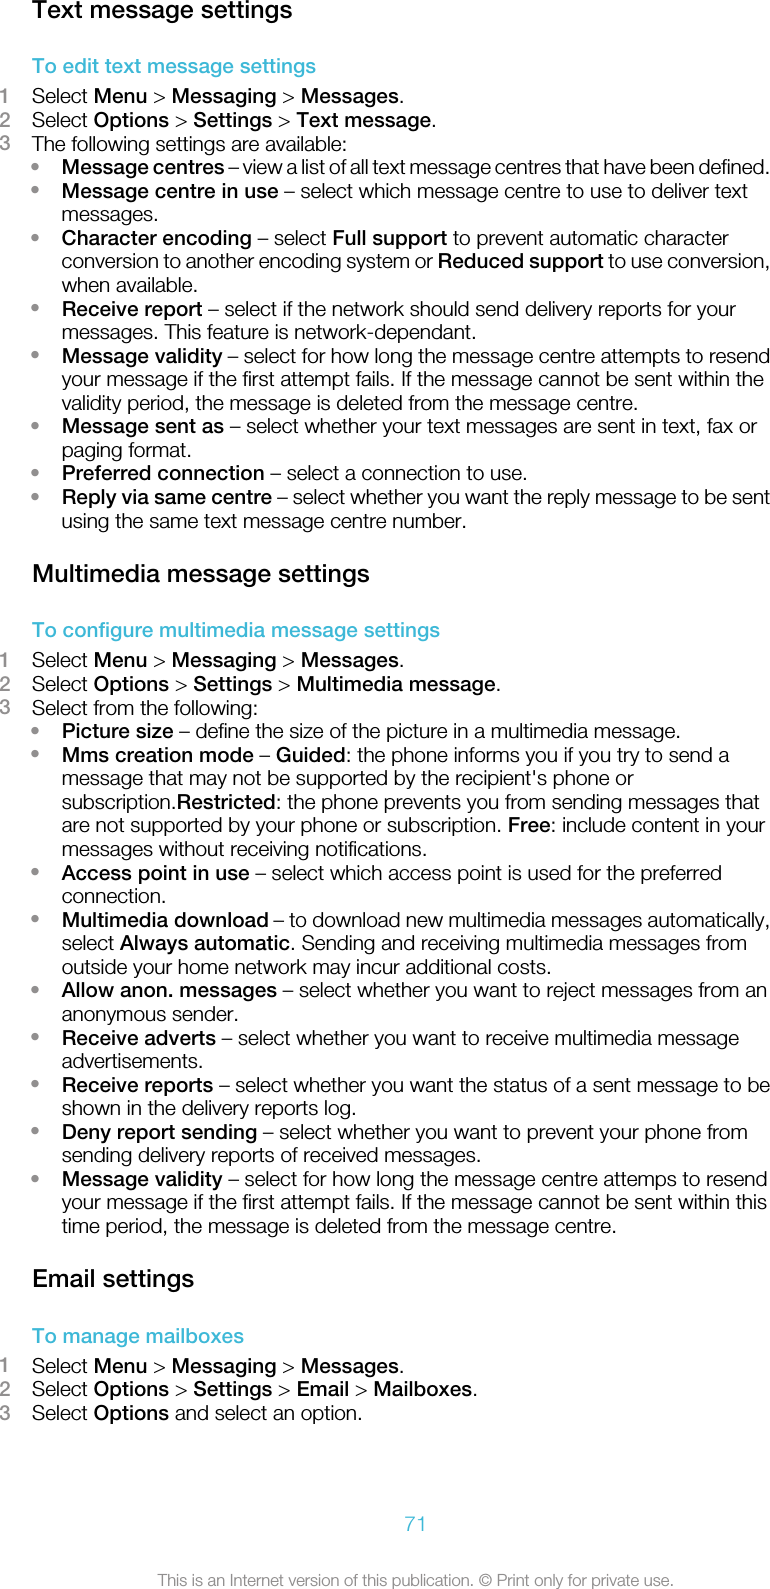 Text message settingsTo edit text message settings1Select Menu &gt; Messaging &gt; Messages.2Select Options &gt; Settings &gt; Text message.3The following settings are available:•Message centres – view a list of all text message centres that have been defined.•Message centre in use – select which message centre to use to deliver textmessages.•Character encoding – select Full support to prevent automatic characterconversion to another encoding system or Reduced support to use conversion,when available.•Receive report – select if the network should send delivery reports for yourmessages. This feature is network-dependant.•Message validity – select for how long the message centre attempts to resendyour message if the first attempt fails. If the message cannot be sent within thevalidity period, the message is deleted from the message centre.•Message sent as – select whether your text messages are sent in text, fax orpaging format.•Preferred connection – select a connection to use.•Reply via same centre – select whether you want the reply message to be sentusing the same text message centre number.Multimedia message settingsTo configure multimedia message settings1Select Menu &gt; Messaging &gt; Messages.2Select Options &gt; Settings &gt; Multimedia message.3Select from the following:•Picture size – define the size of the picture in a multimedia message.•Mms creation mode – Guided: the phone informs you if you try to send amessage that may not be supported by the recipient&apos;s phone orsubscription.Restricted: the phone prevents you from sending messages thatare not supported by your phone or subscription. Free: include content in yourmessages without receiving notifications.•Access point in use – select which access point is used for the preferredconnection.•Multimedia download – to download new multimedia messages automatically,select Always automatic. Sending and receiving multimedia messages fromoutside your home network may incur additional costs.•Allow anon. messages – select whether you want to reject messages from ananonymous sender.•Receive adverts – select whether you want to receive multimedia messageadvertisements.•Receive reports – select whether you want the status of a sent message to beshown in the delivery reports log.•Deny report sending – select whether you want to prevent your phone fromsending delivery reports of received messages.•Message validity – select for how long the message centre attemps to resendyour message if the first attempt fails. If the message cannot be sent within thistime period, the message is deleted from the message centre.Email settingsTo manage mailboxes1Select Menu &gt; Messaging &gt; Messages.2Select Options &gt; Settings &gt; Email &gt; Mailboxes.3Select Options and select an option.71This is an Internet version of this publication. © Print only for private use.